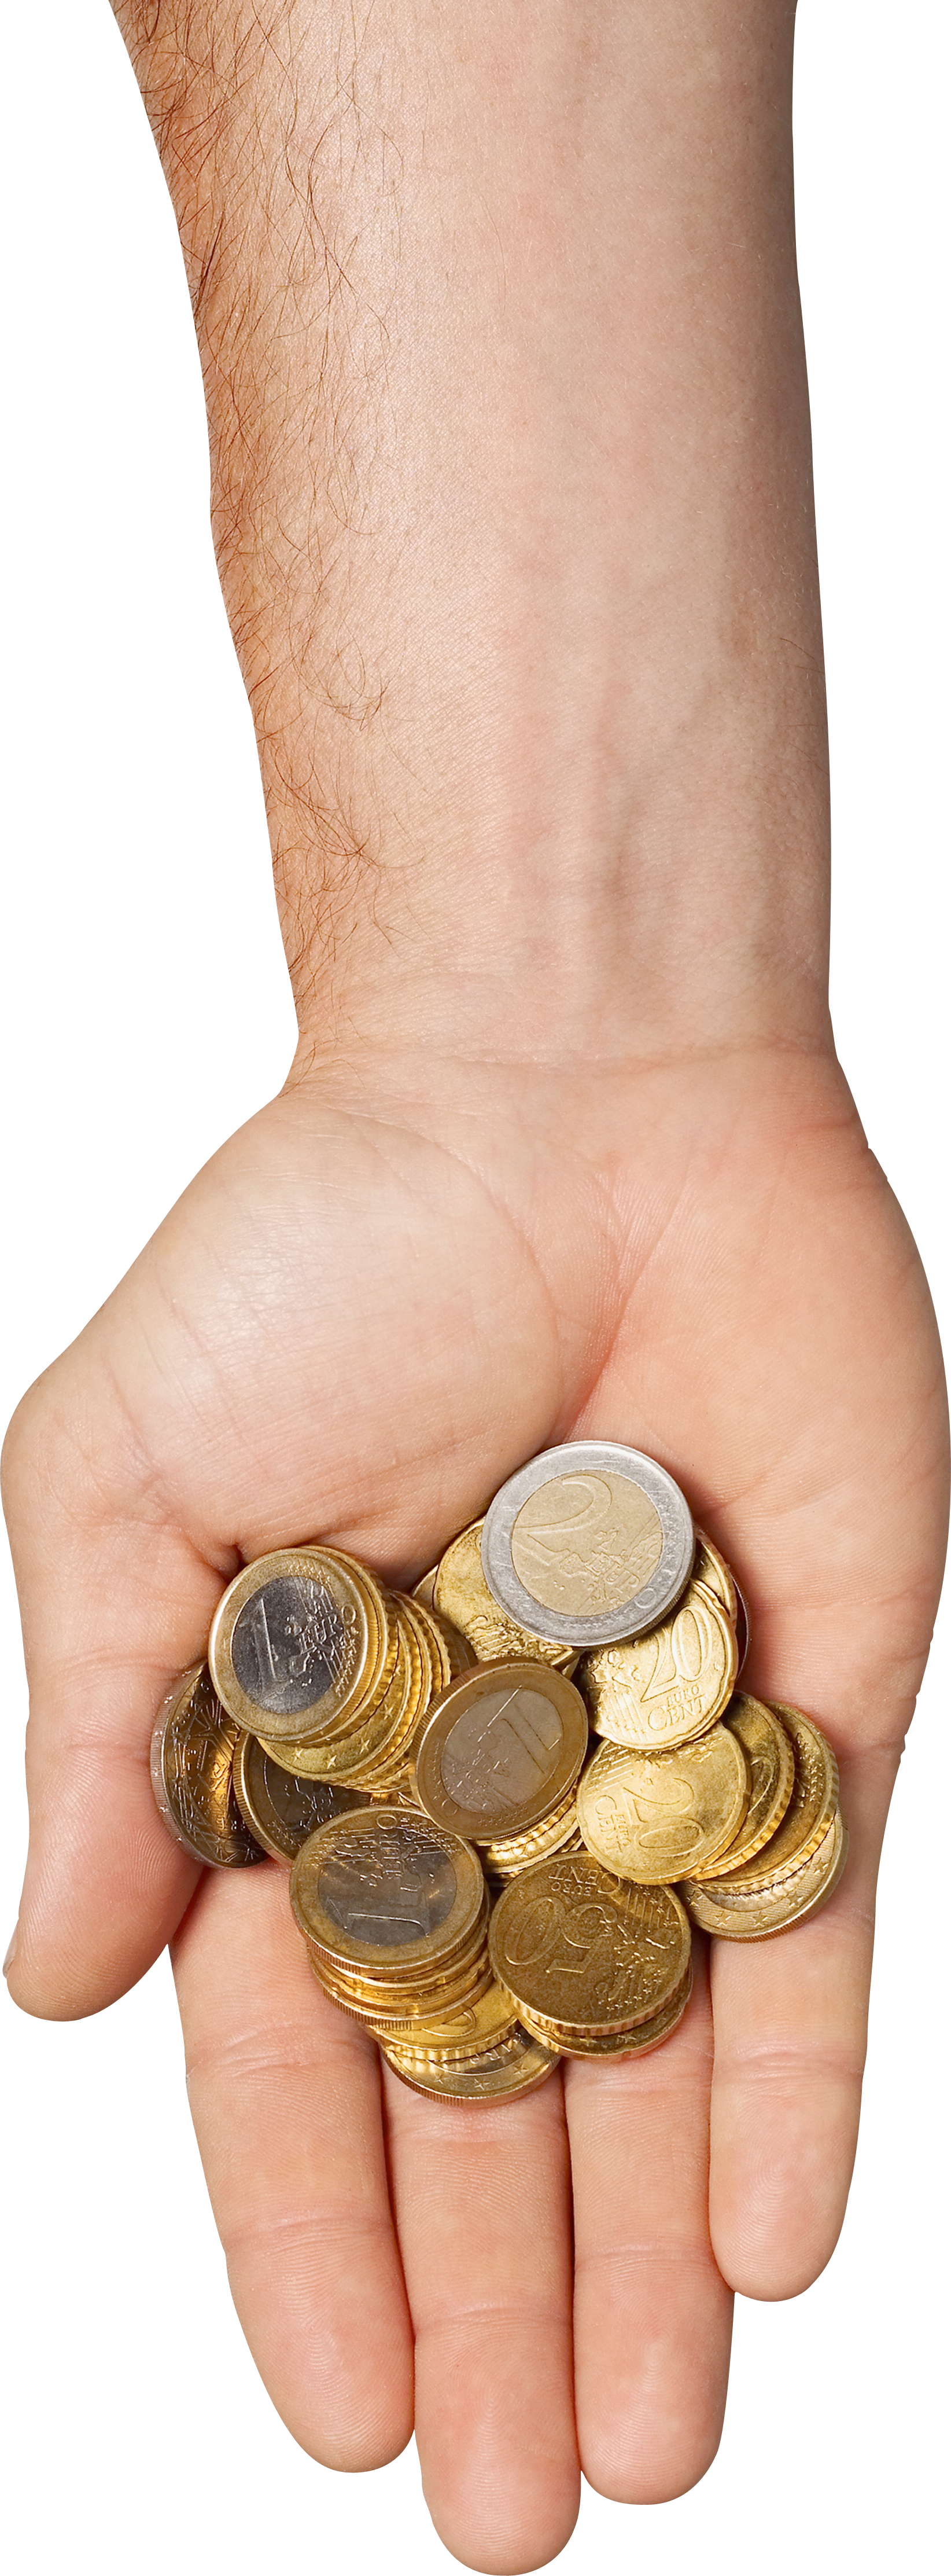 Holding coins isolated stock. Hand with money png